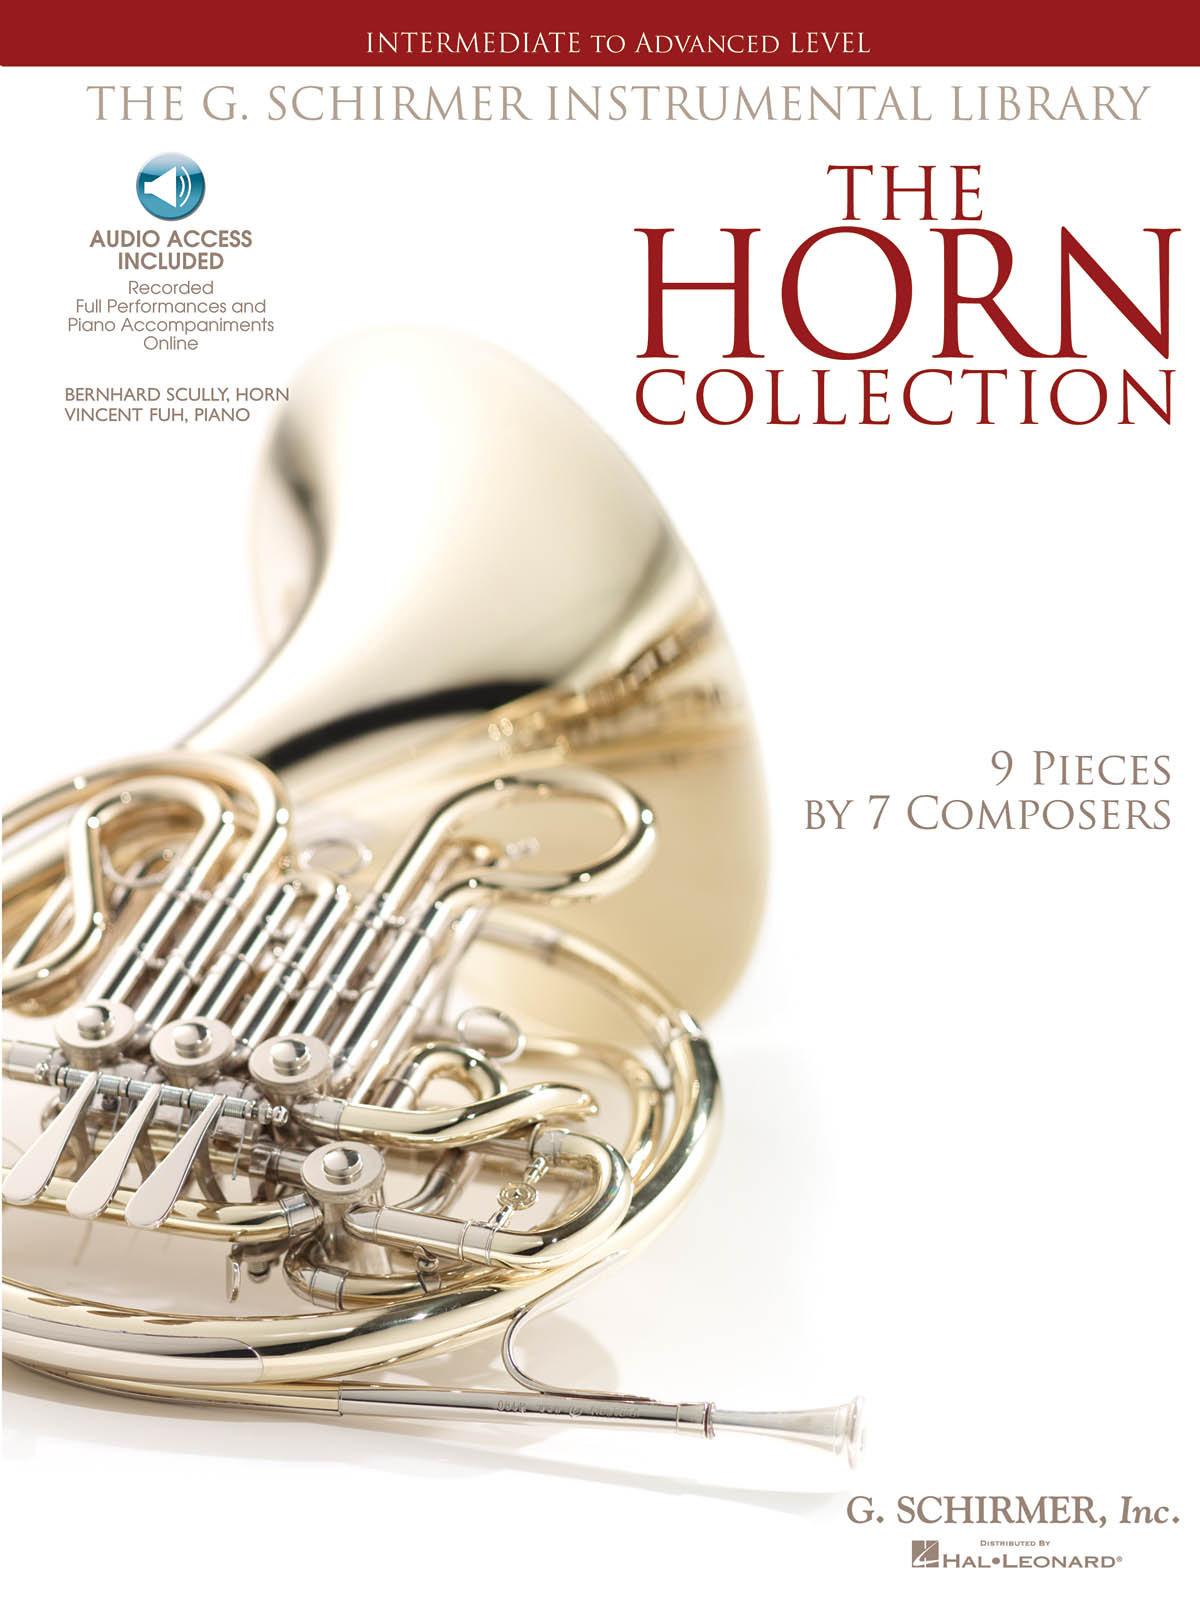 The Horn Collection - Intermediate to Advanced Level / G. Schirmer Instrumental Library